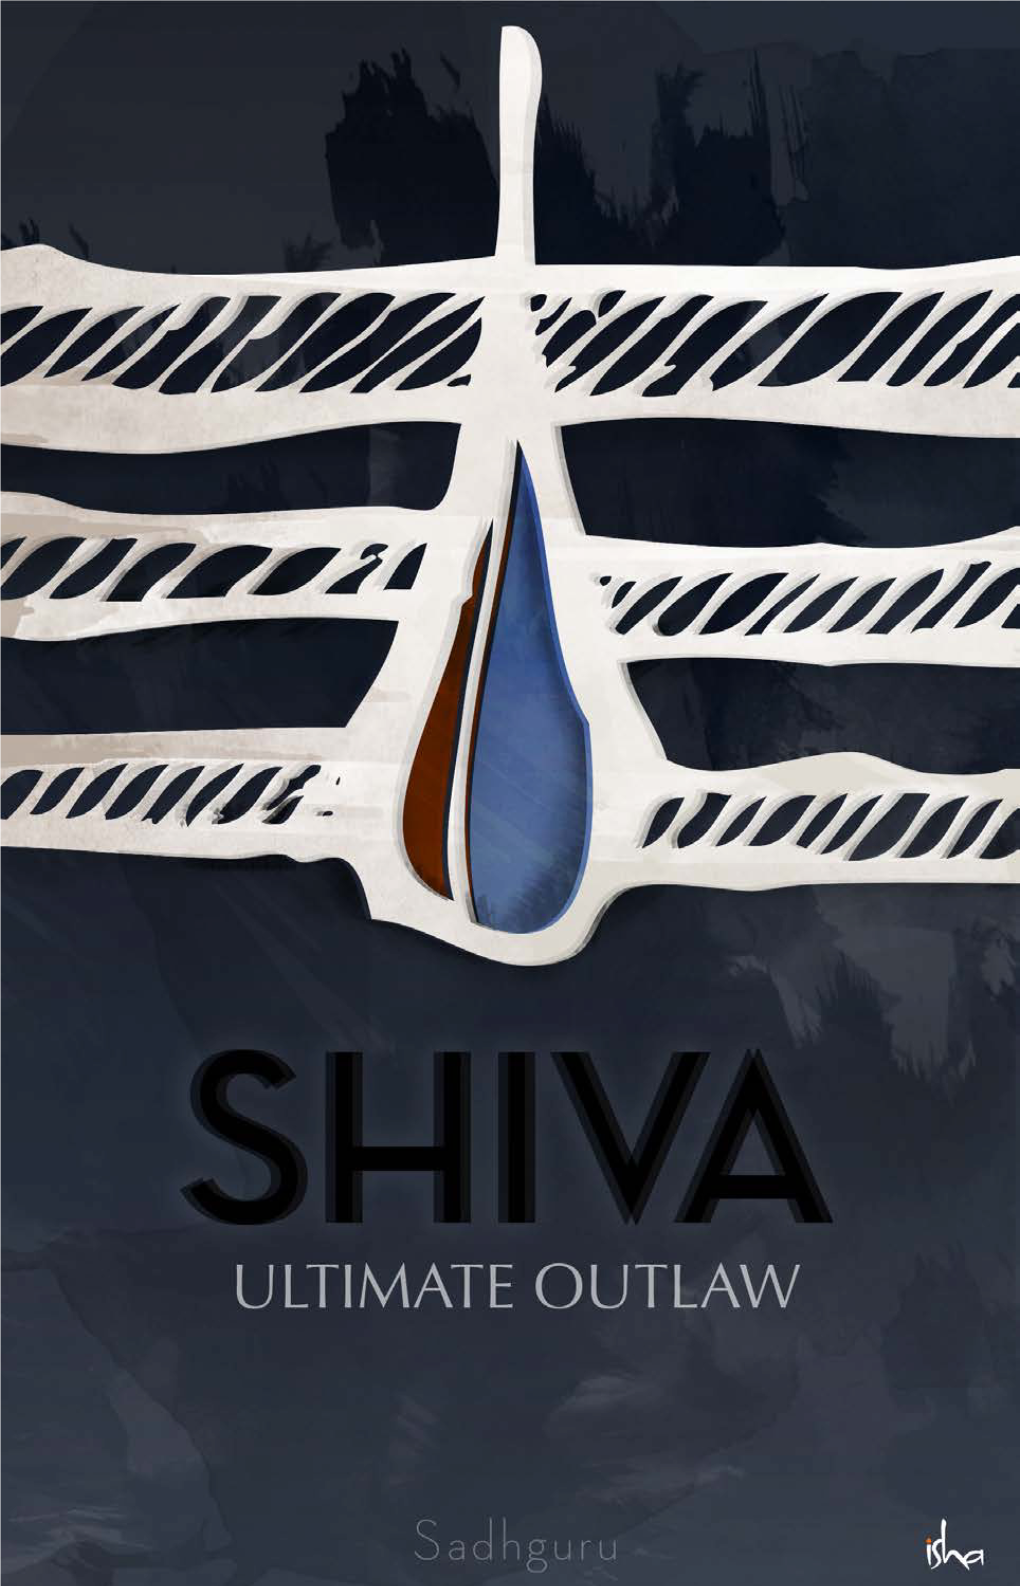 Shiva Is the Ultimate Outlaw